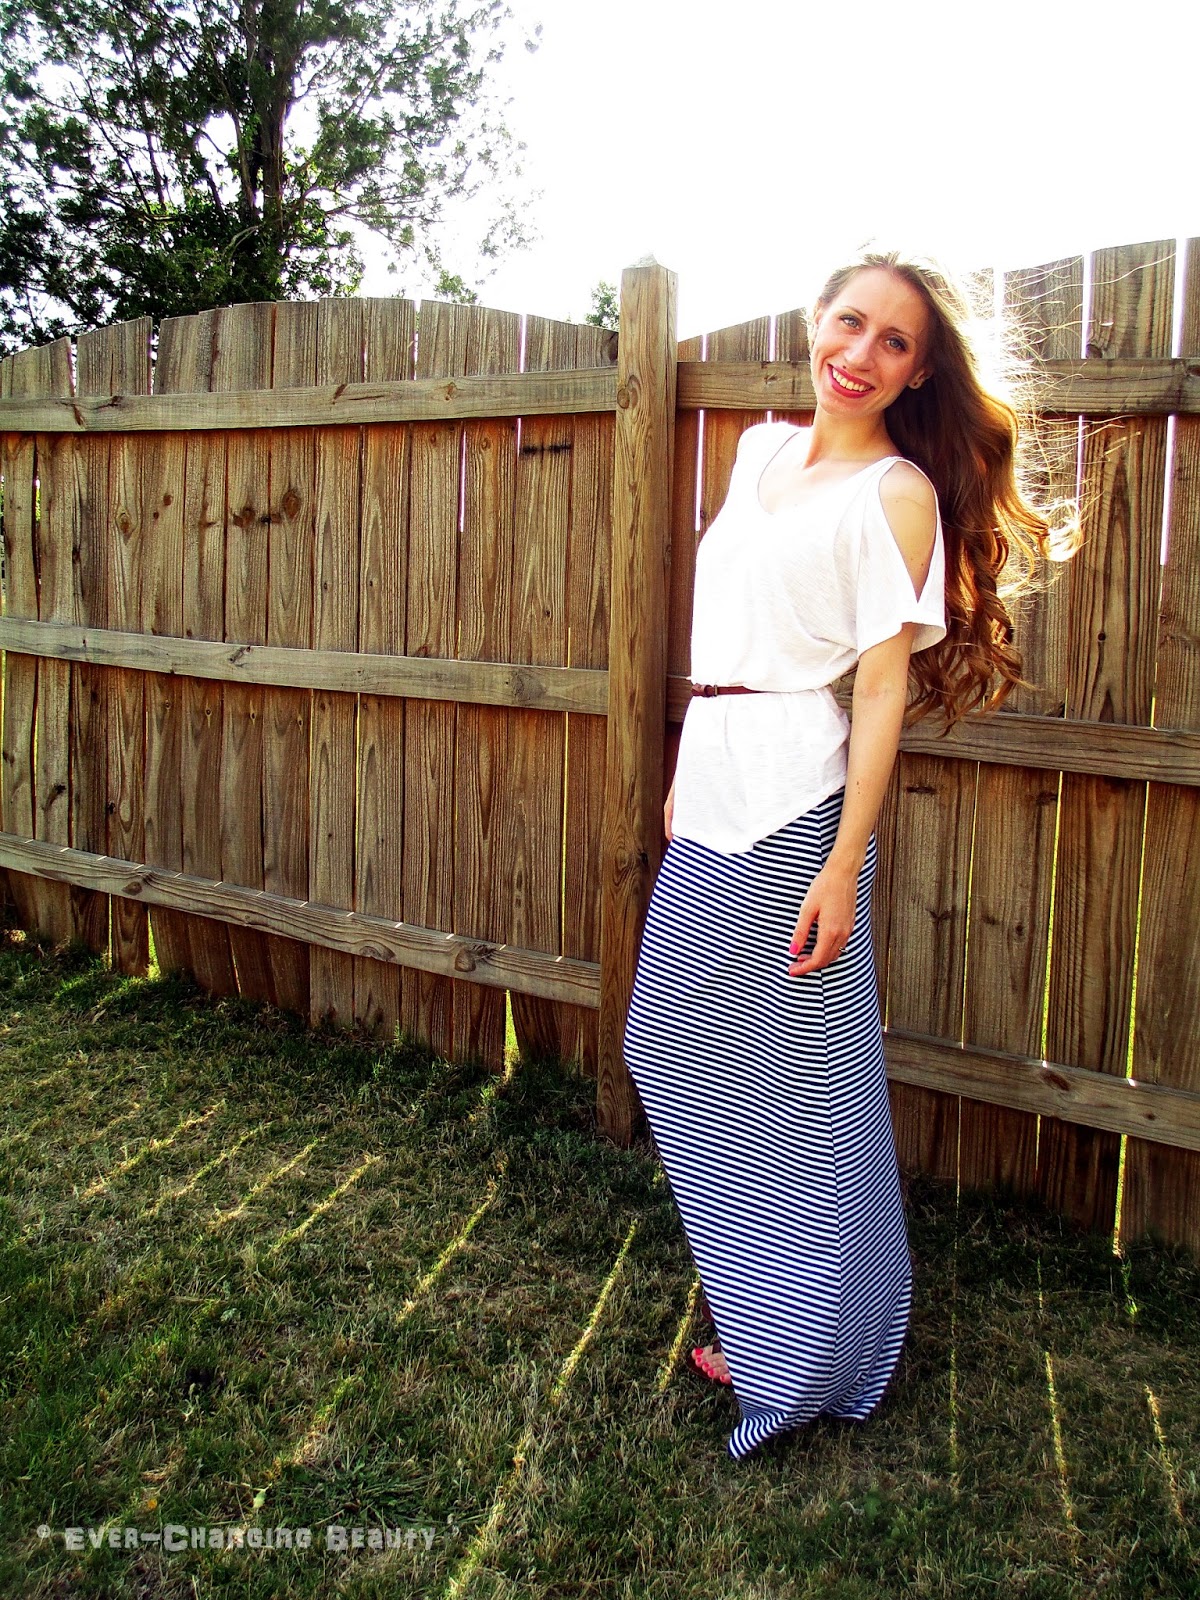 Ever-Changing Beauty.: OOTD Hot Day Maxi Style